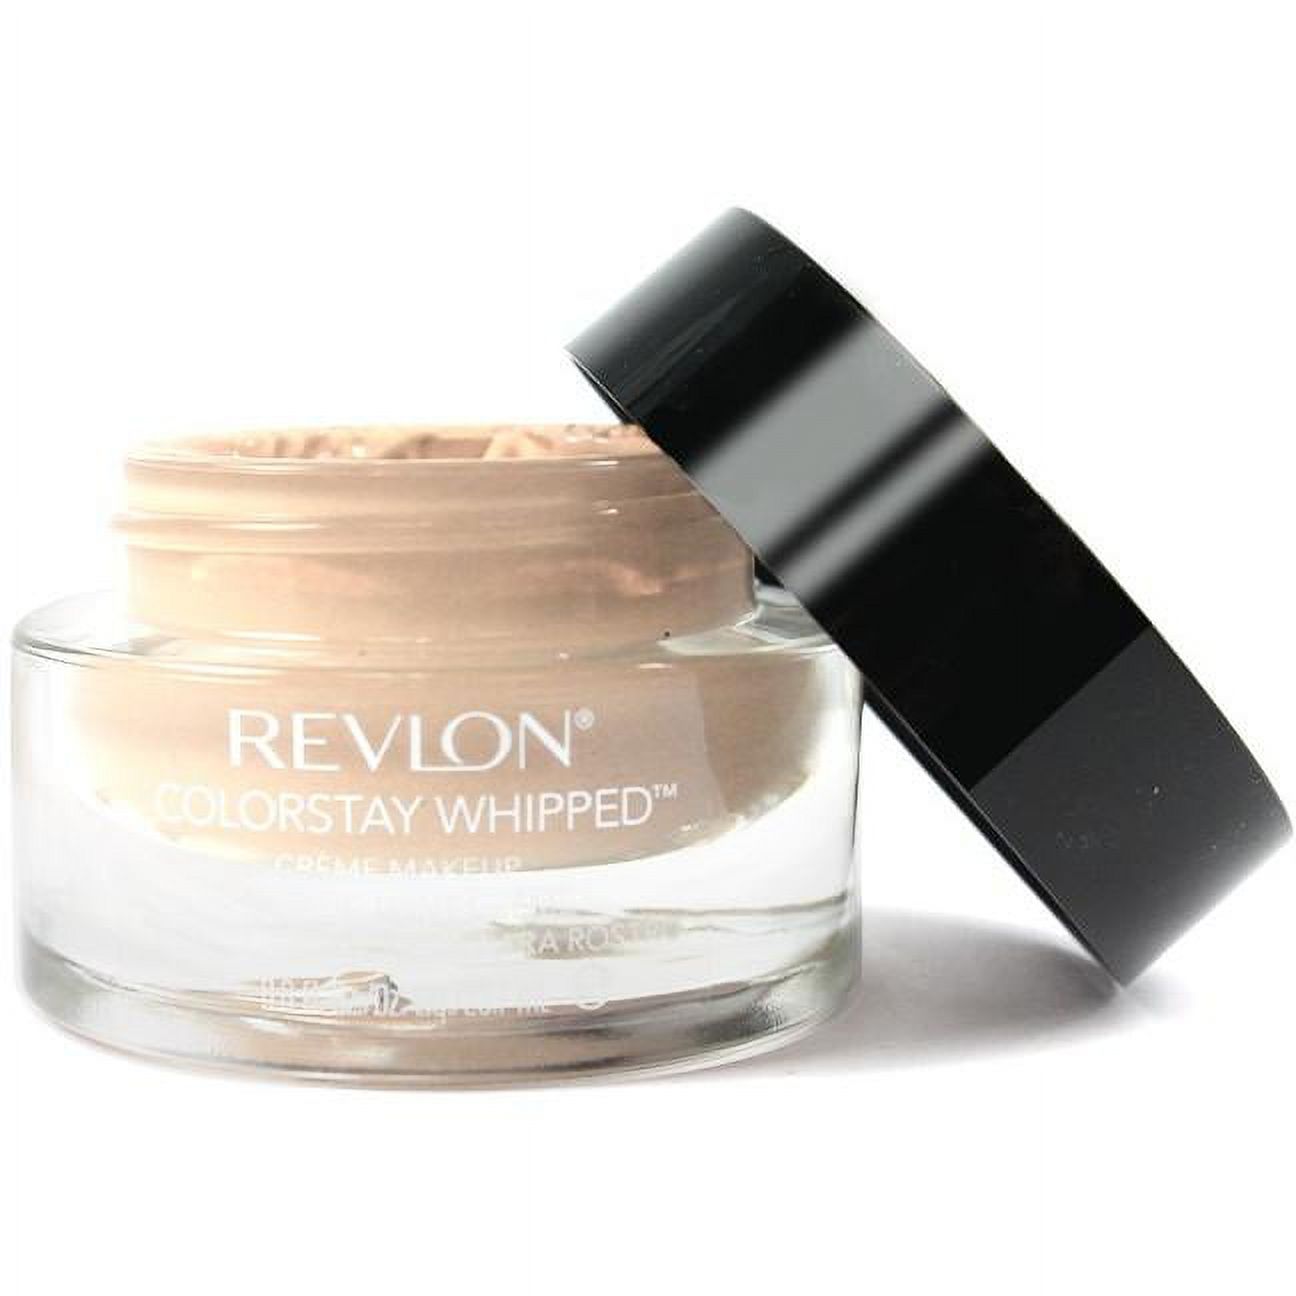 Revlon ColorStay Whipped Creme Makeup, Warm Golden - image 3 of 15